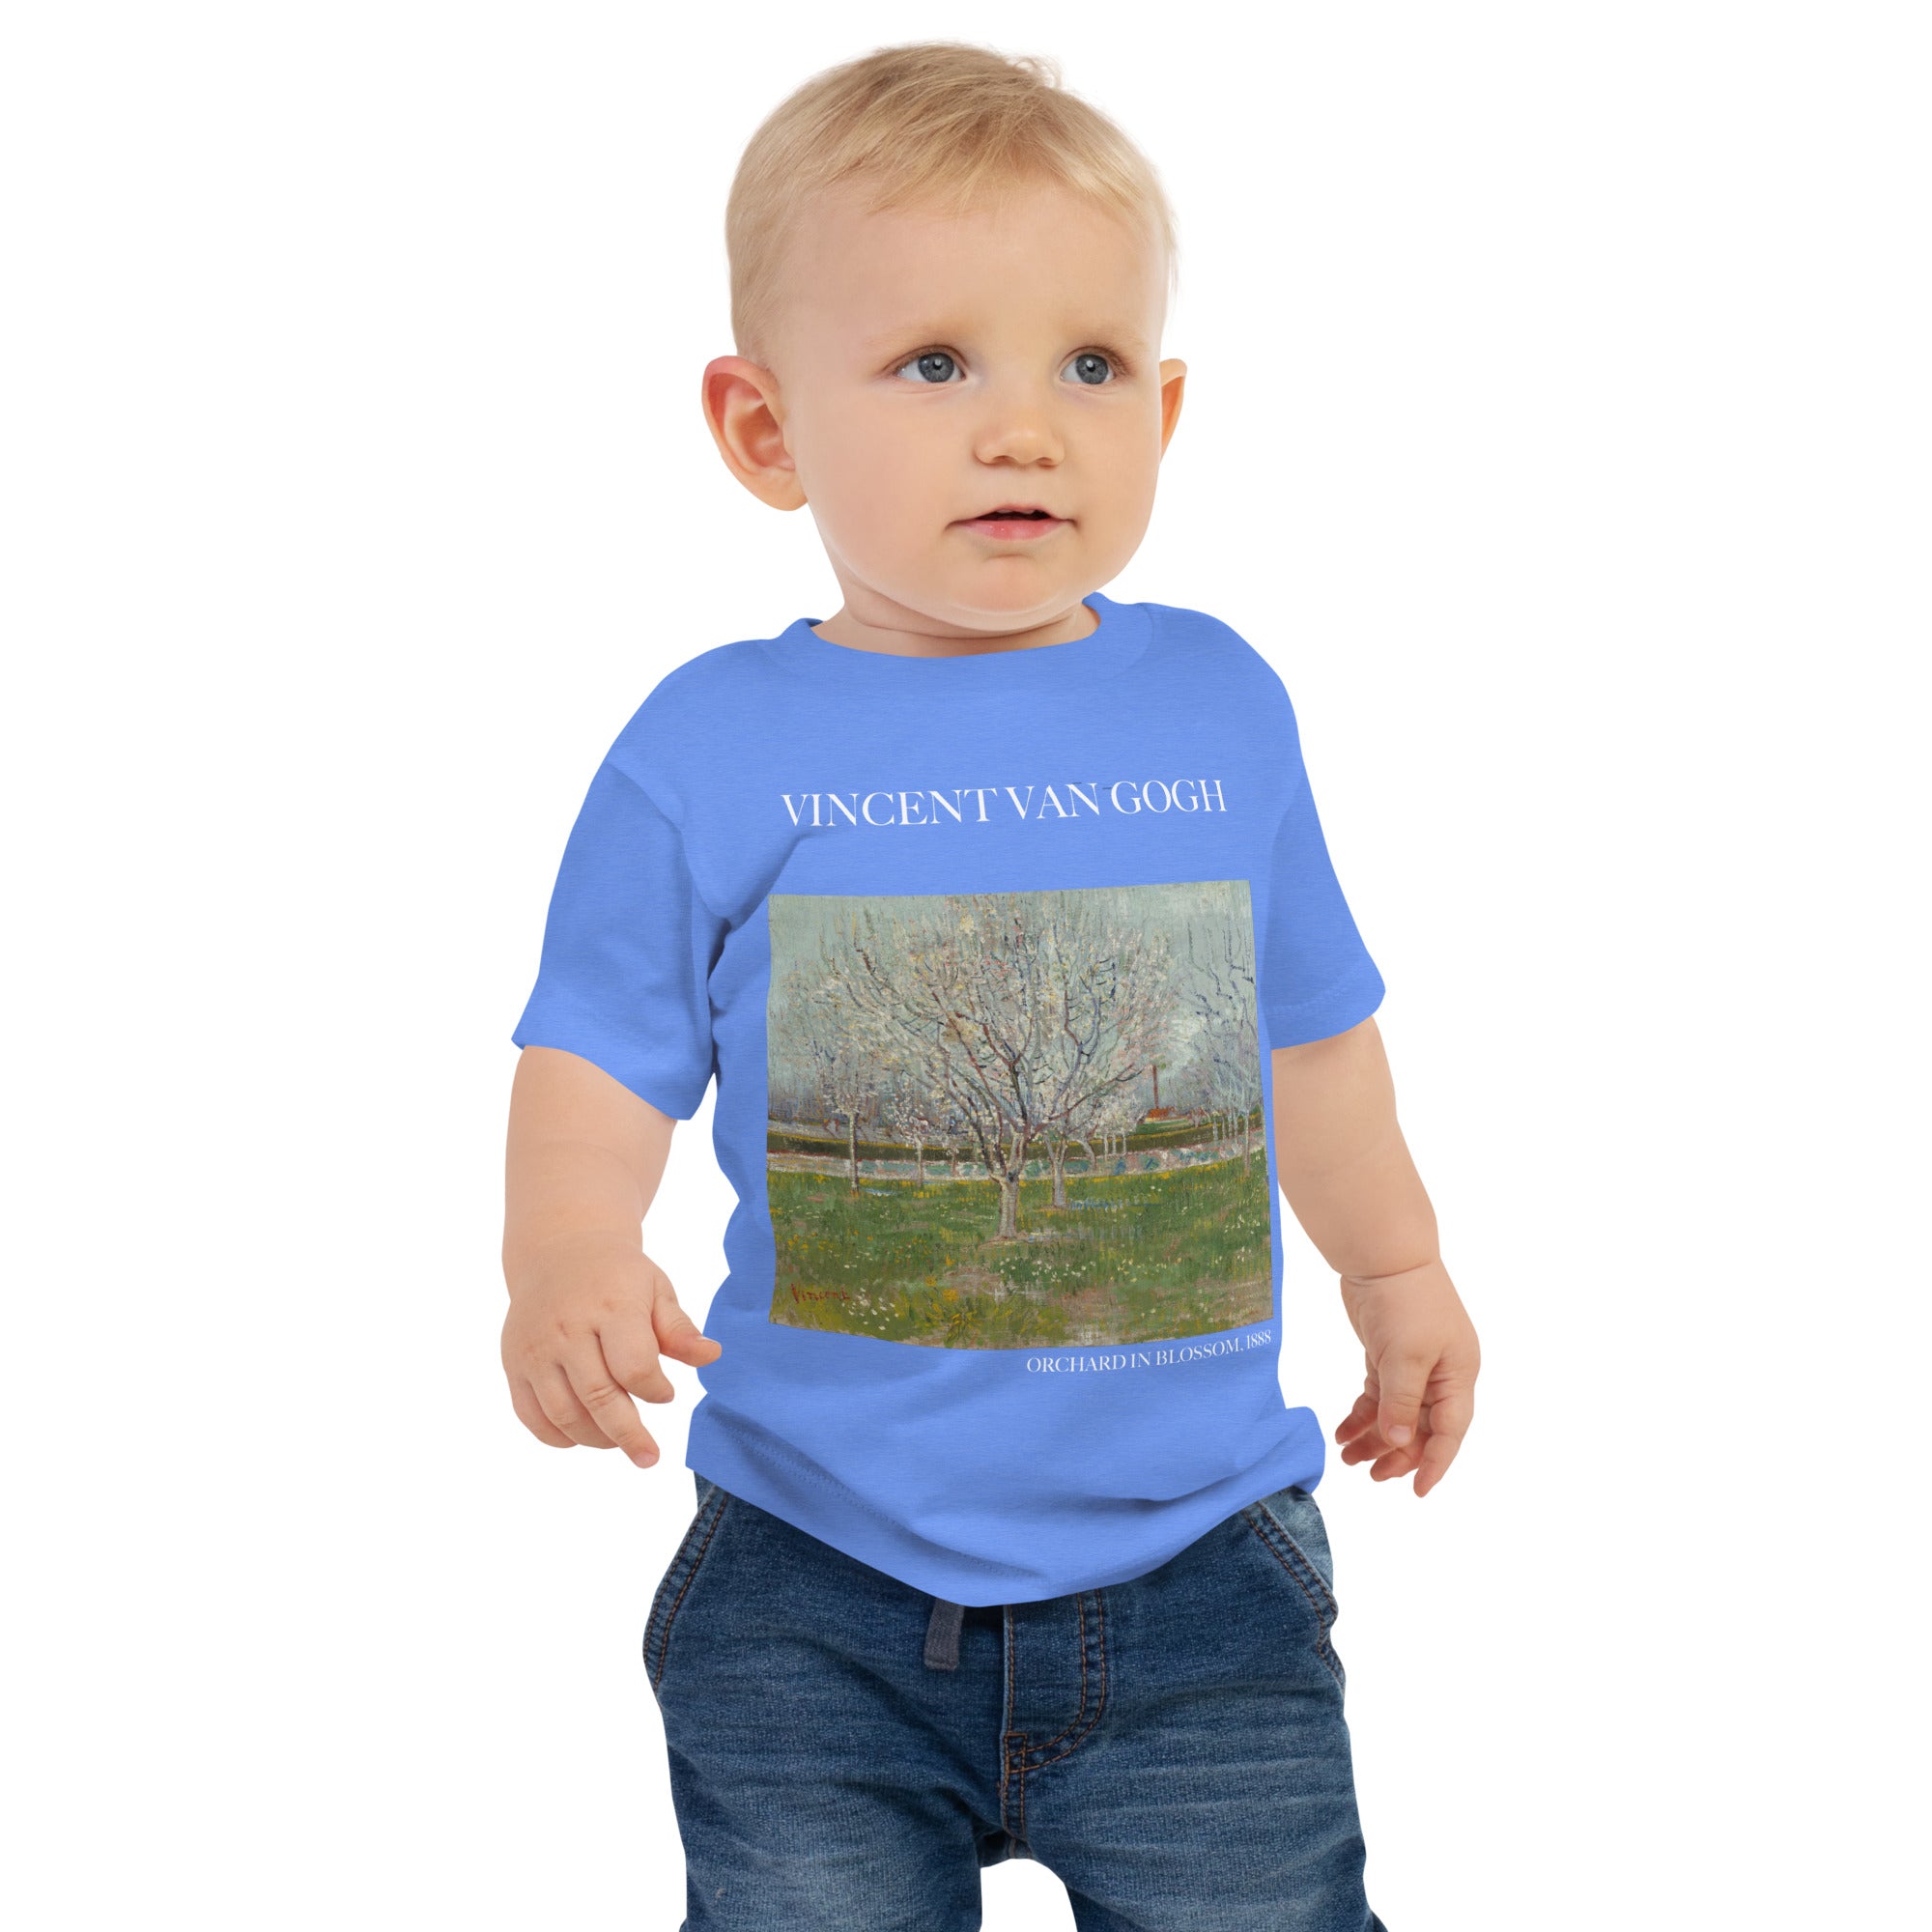 Vincent van Gogh 'Orchard in Blossom' Famous Painting Baby Staple T-Shirt | Premium Baby Art Tee